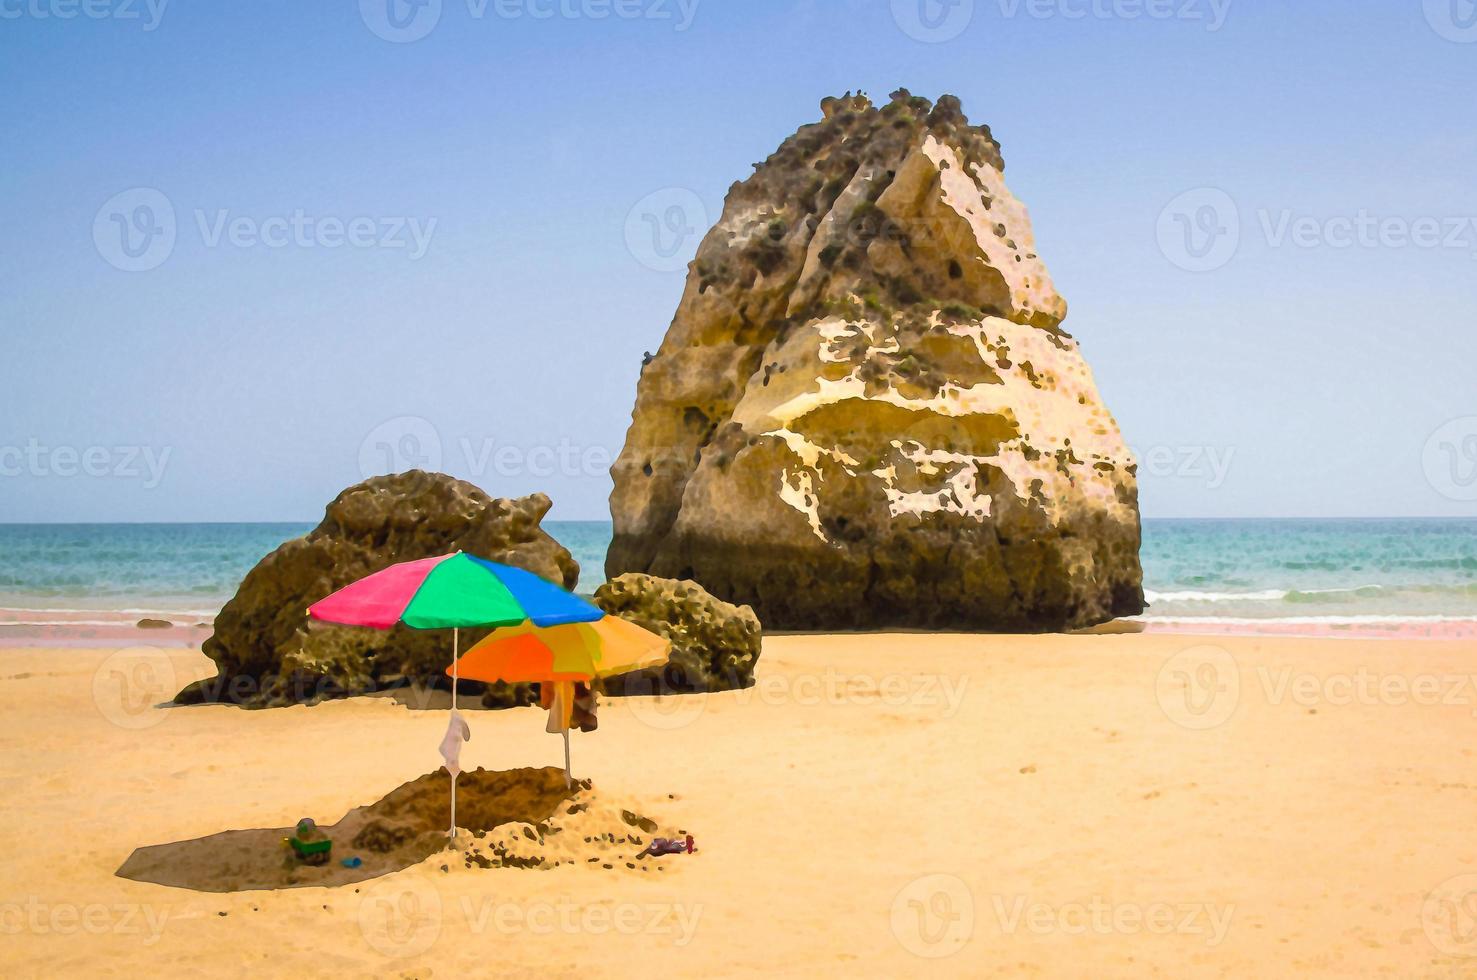 Watercolor drawing of two colored sun umbrellas on the beach, Portugal, Algarve, children's sandbox on beach, huge stones on the ocean beach photo